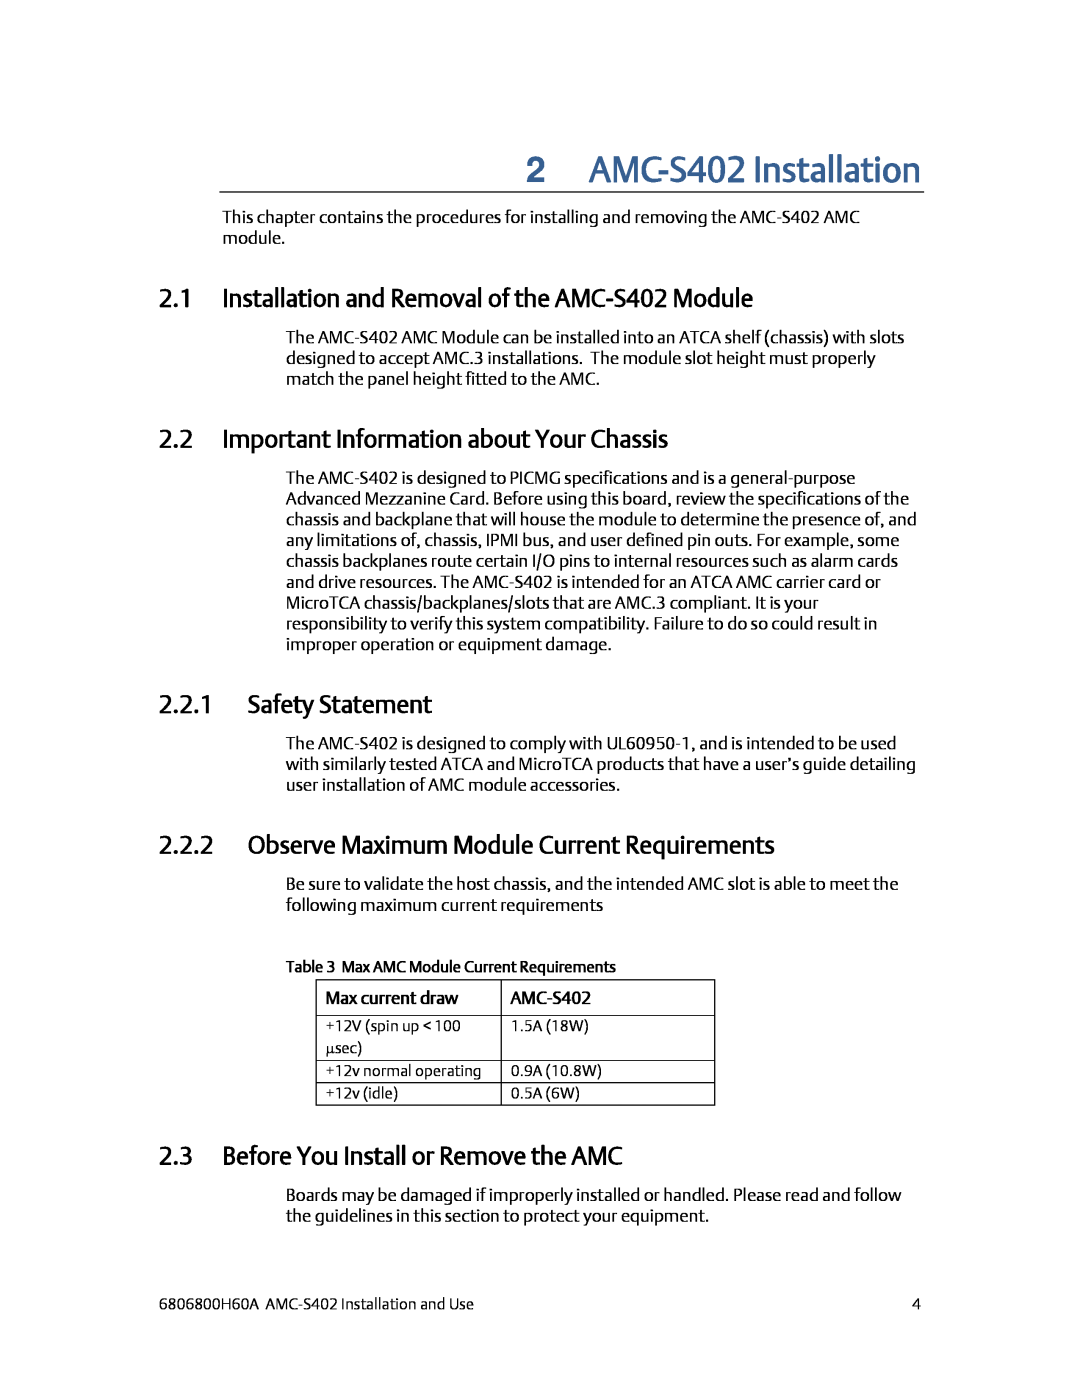 Emerson manual AMC-S402 Installation, Installation and Removal of the AMC-S402 Module, Safety Statement 